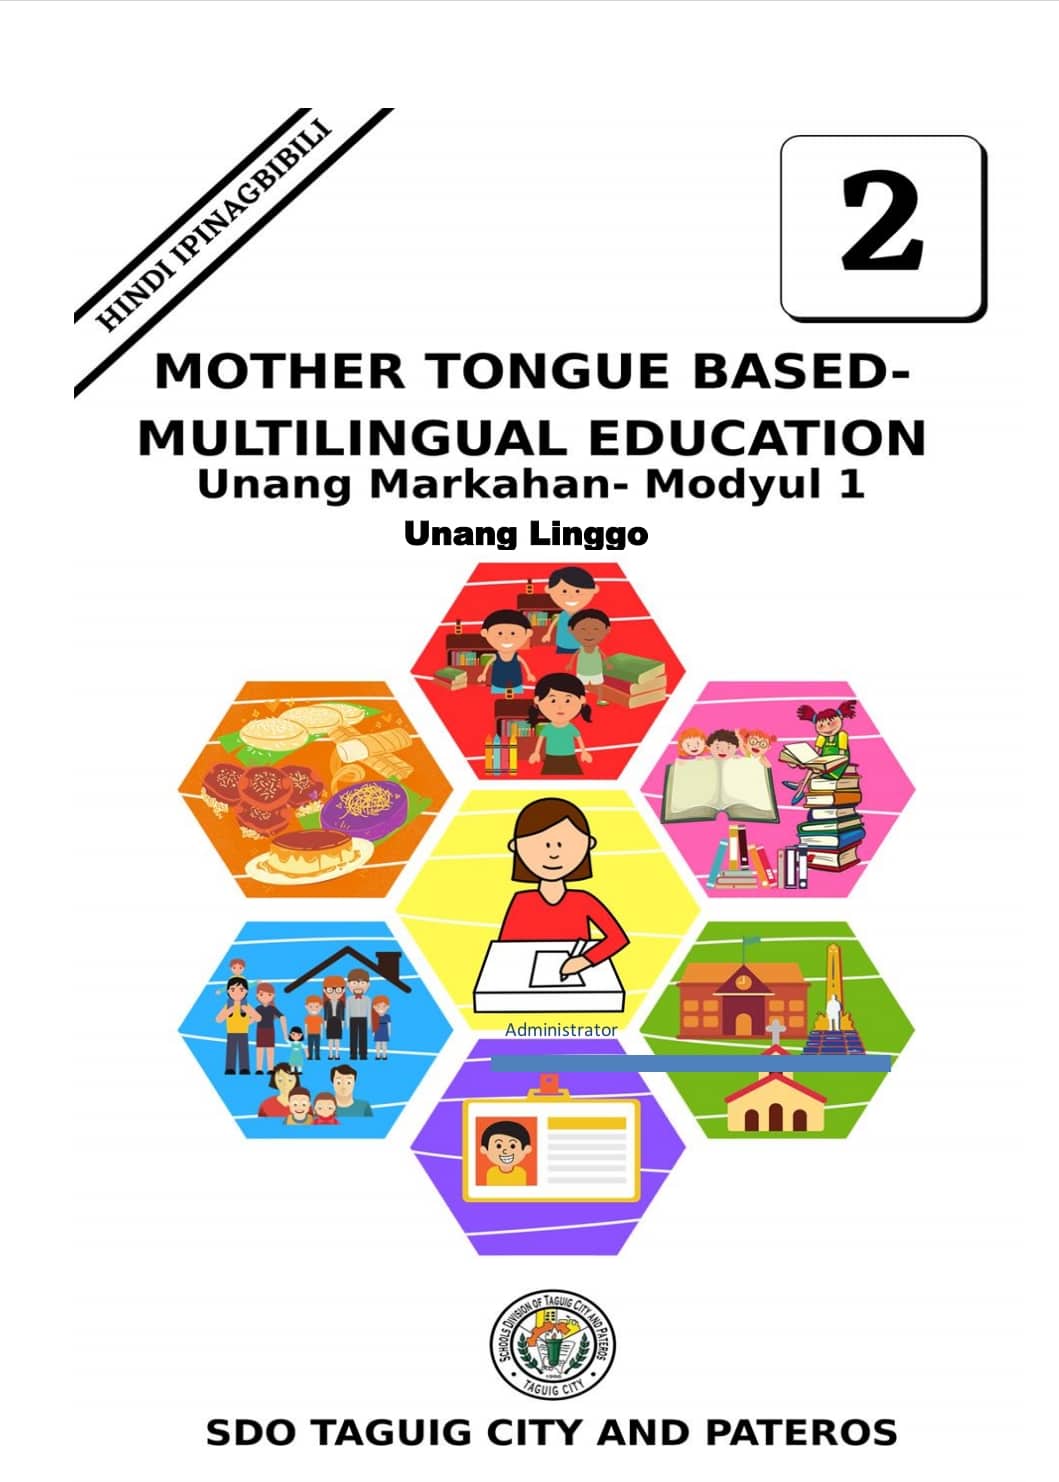 MLE-MOTHER TONGUE2 